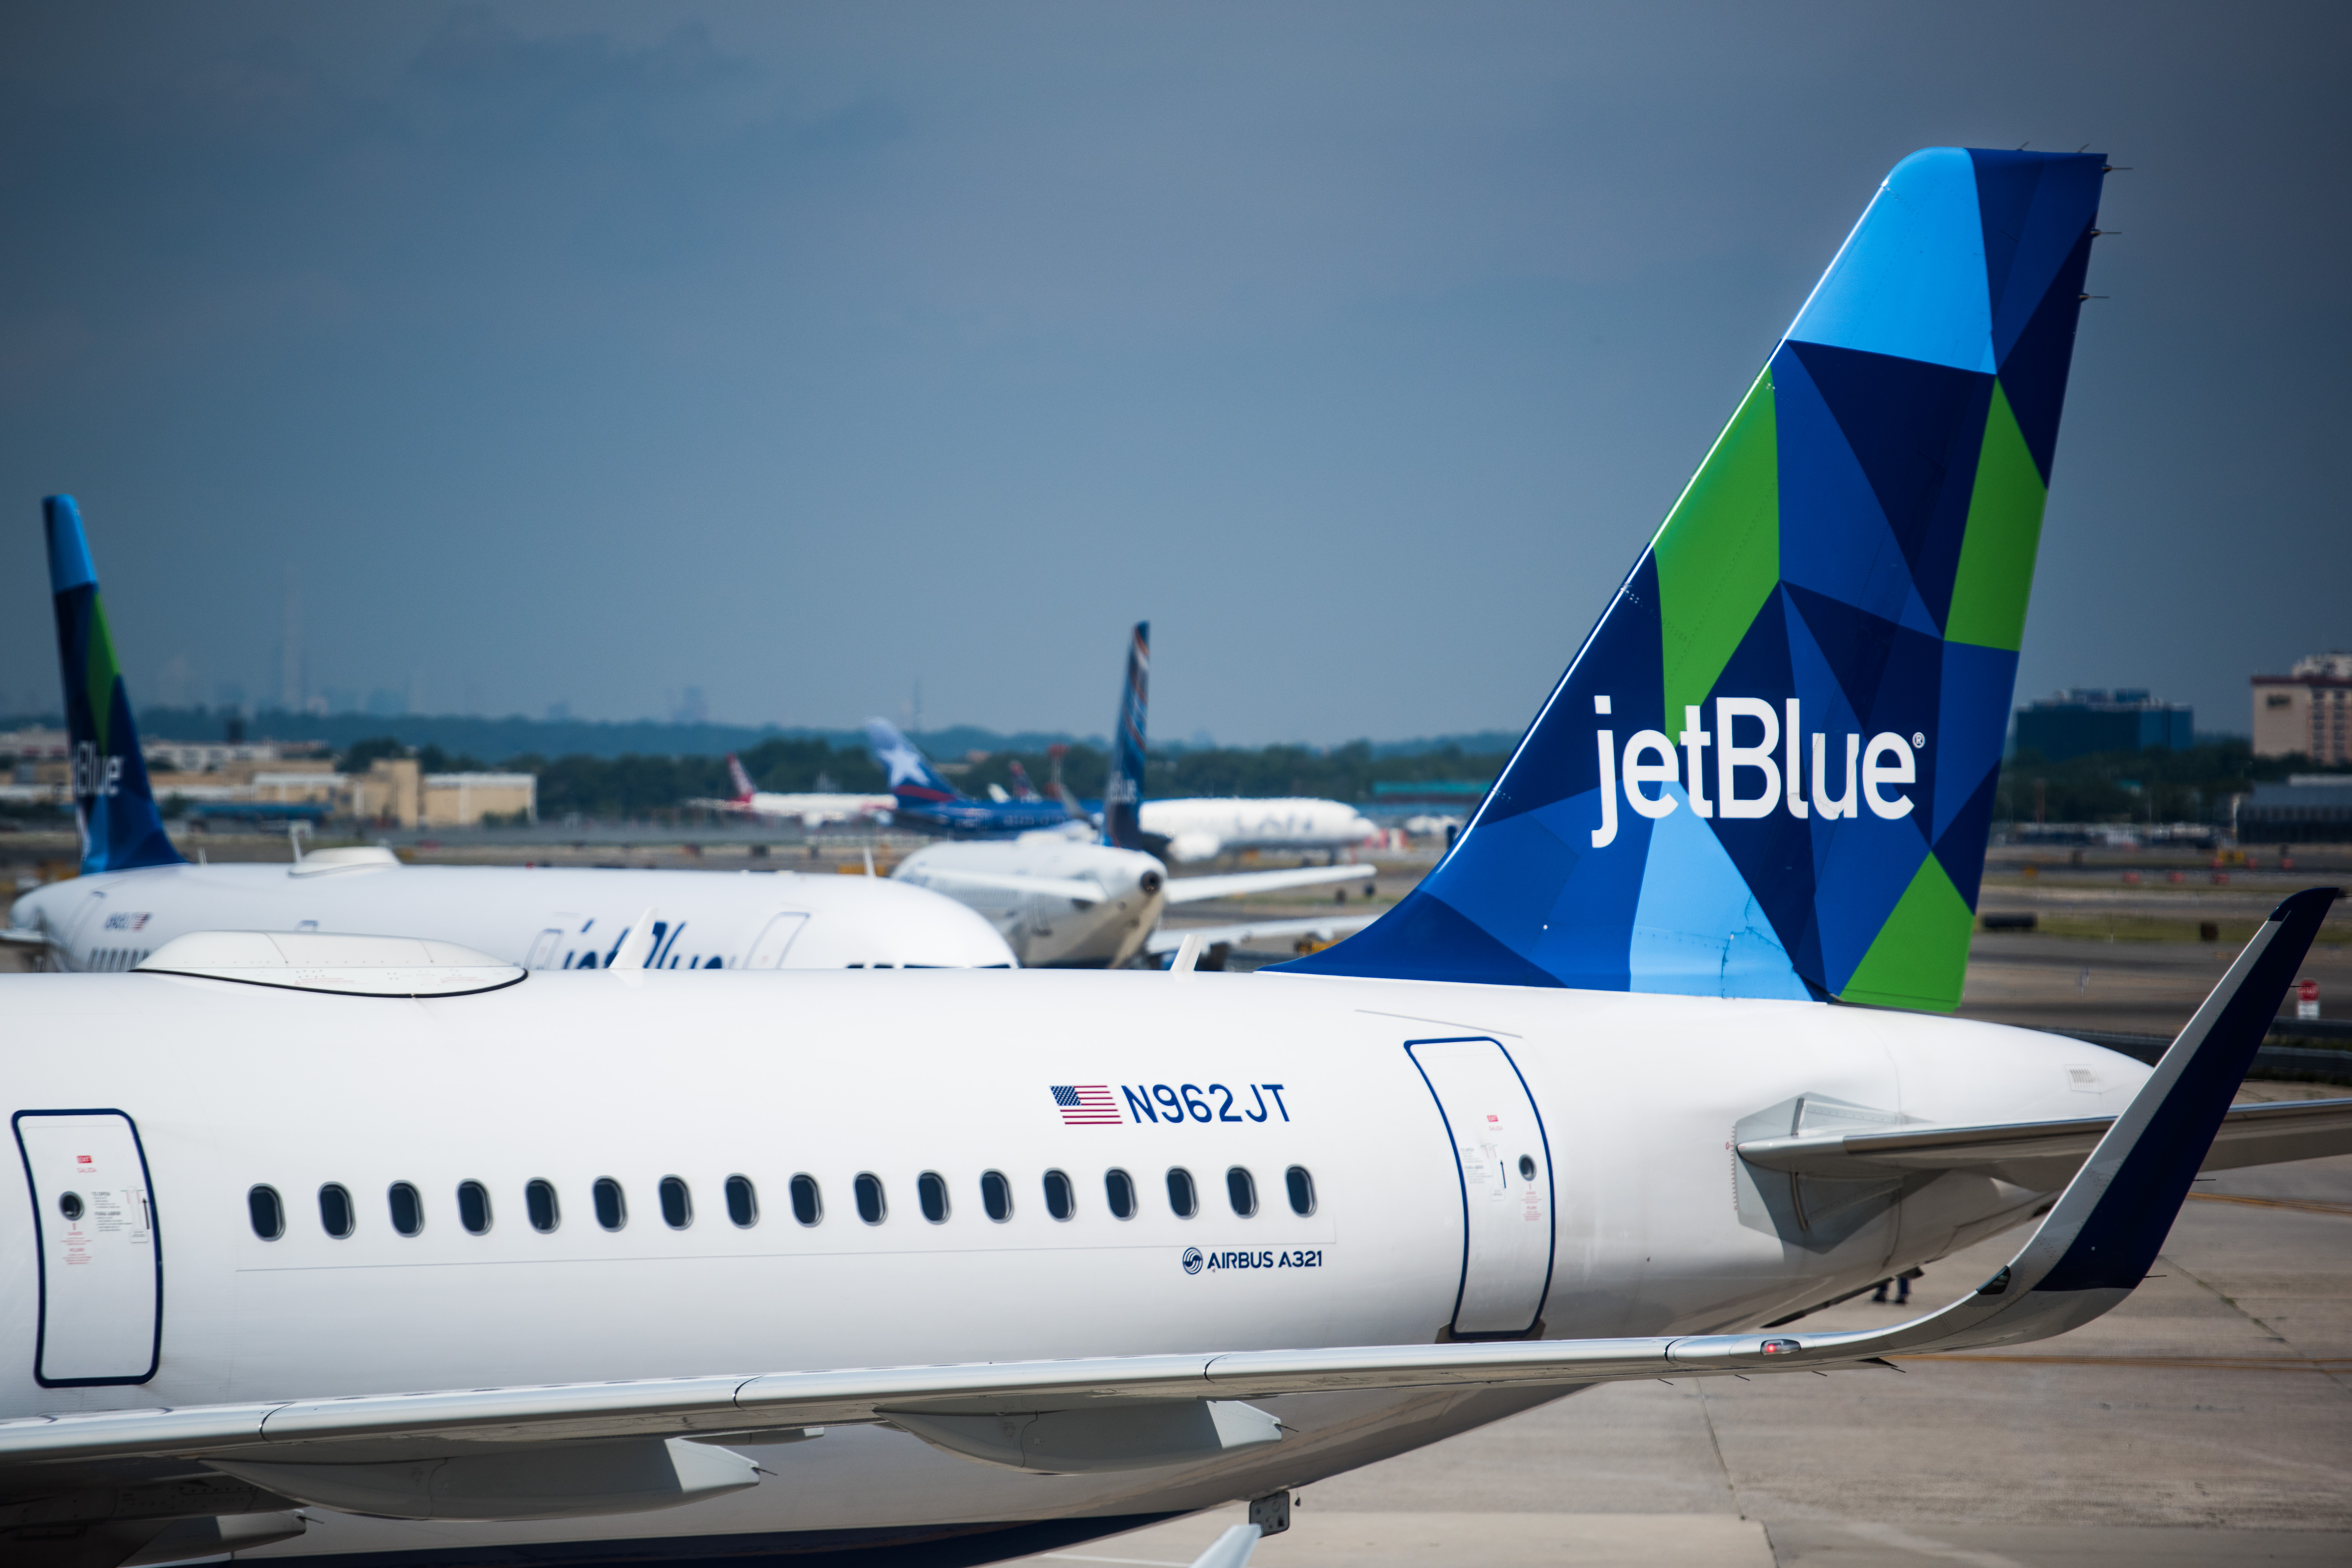 JetBlue Is Offering $99 Flights to Florida for Hurricane Irma Evacuees